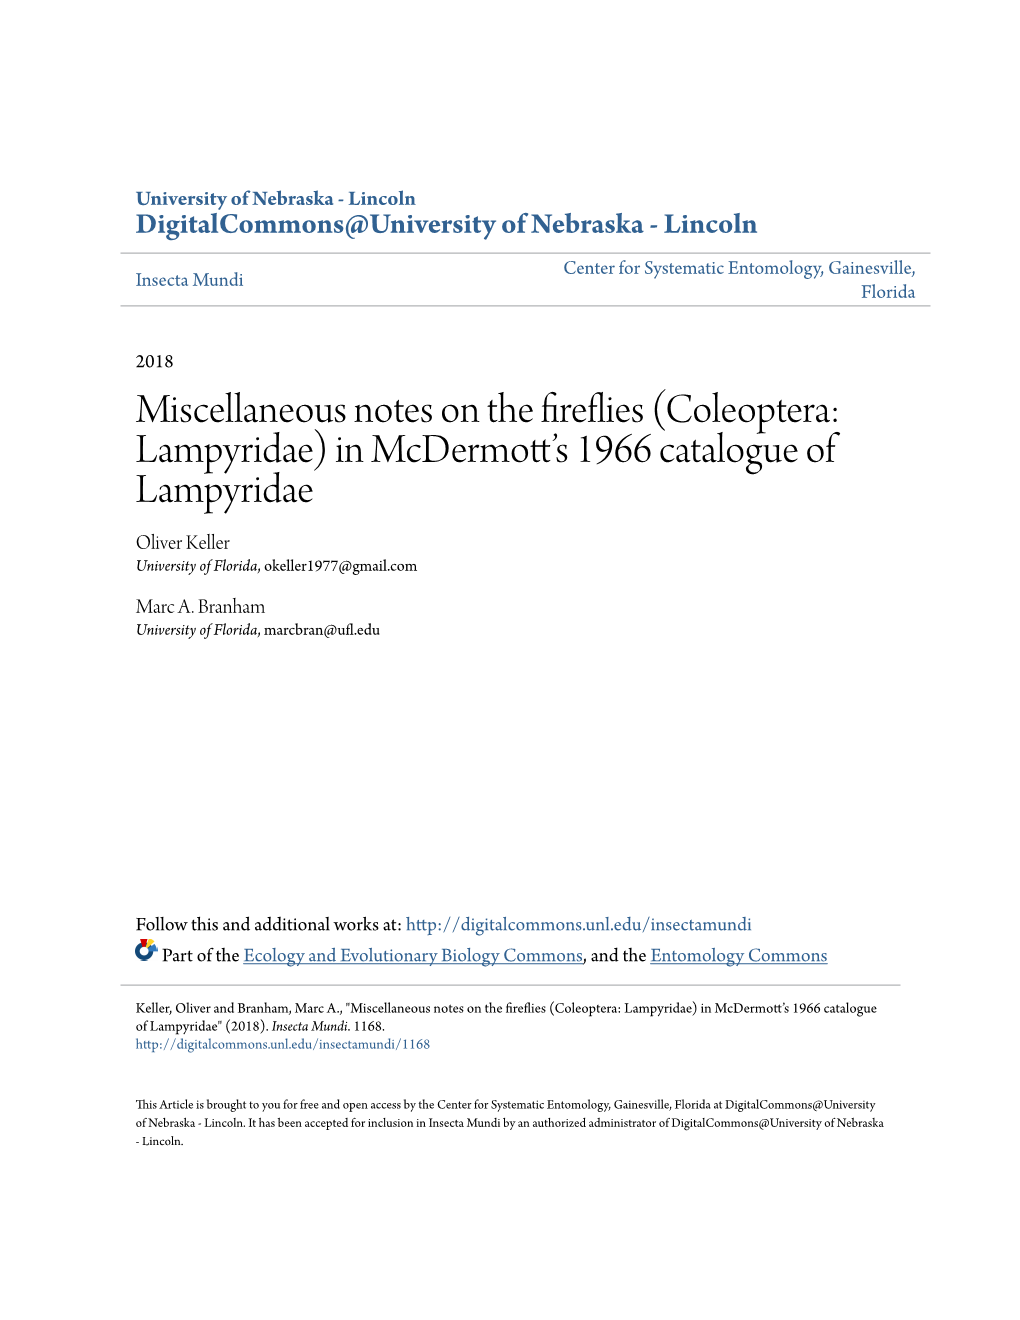 Miscellaneous Notes on the Fireflies (Coleoptera: Lampyridae) in Mcdermott’S 1966 Catalogue of Lampyridae" (2018)